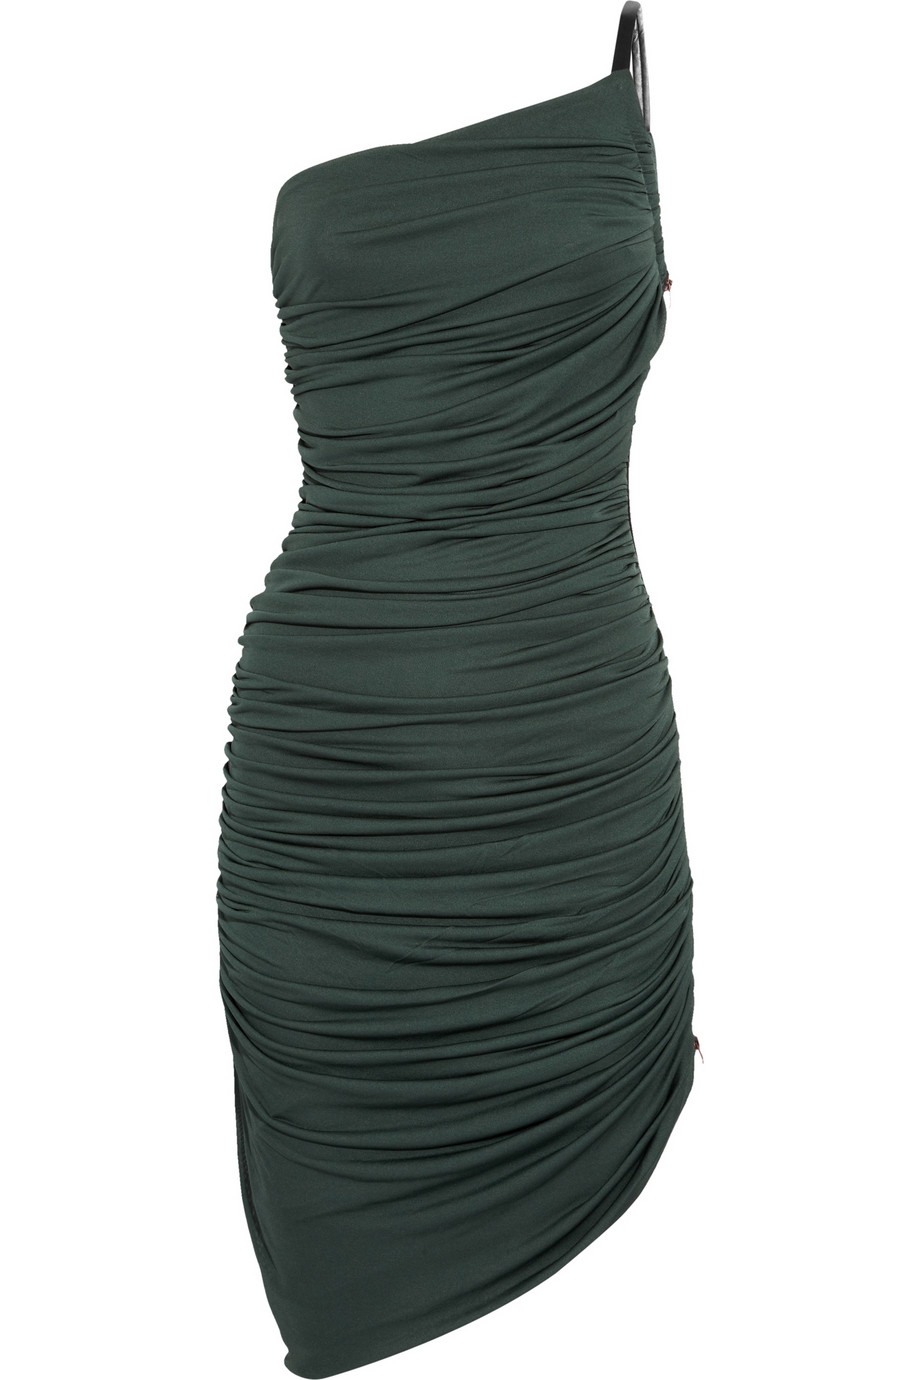 Halston Asymmetric Ruched Jersey Dress in Forest Green (Green) - Lyst